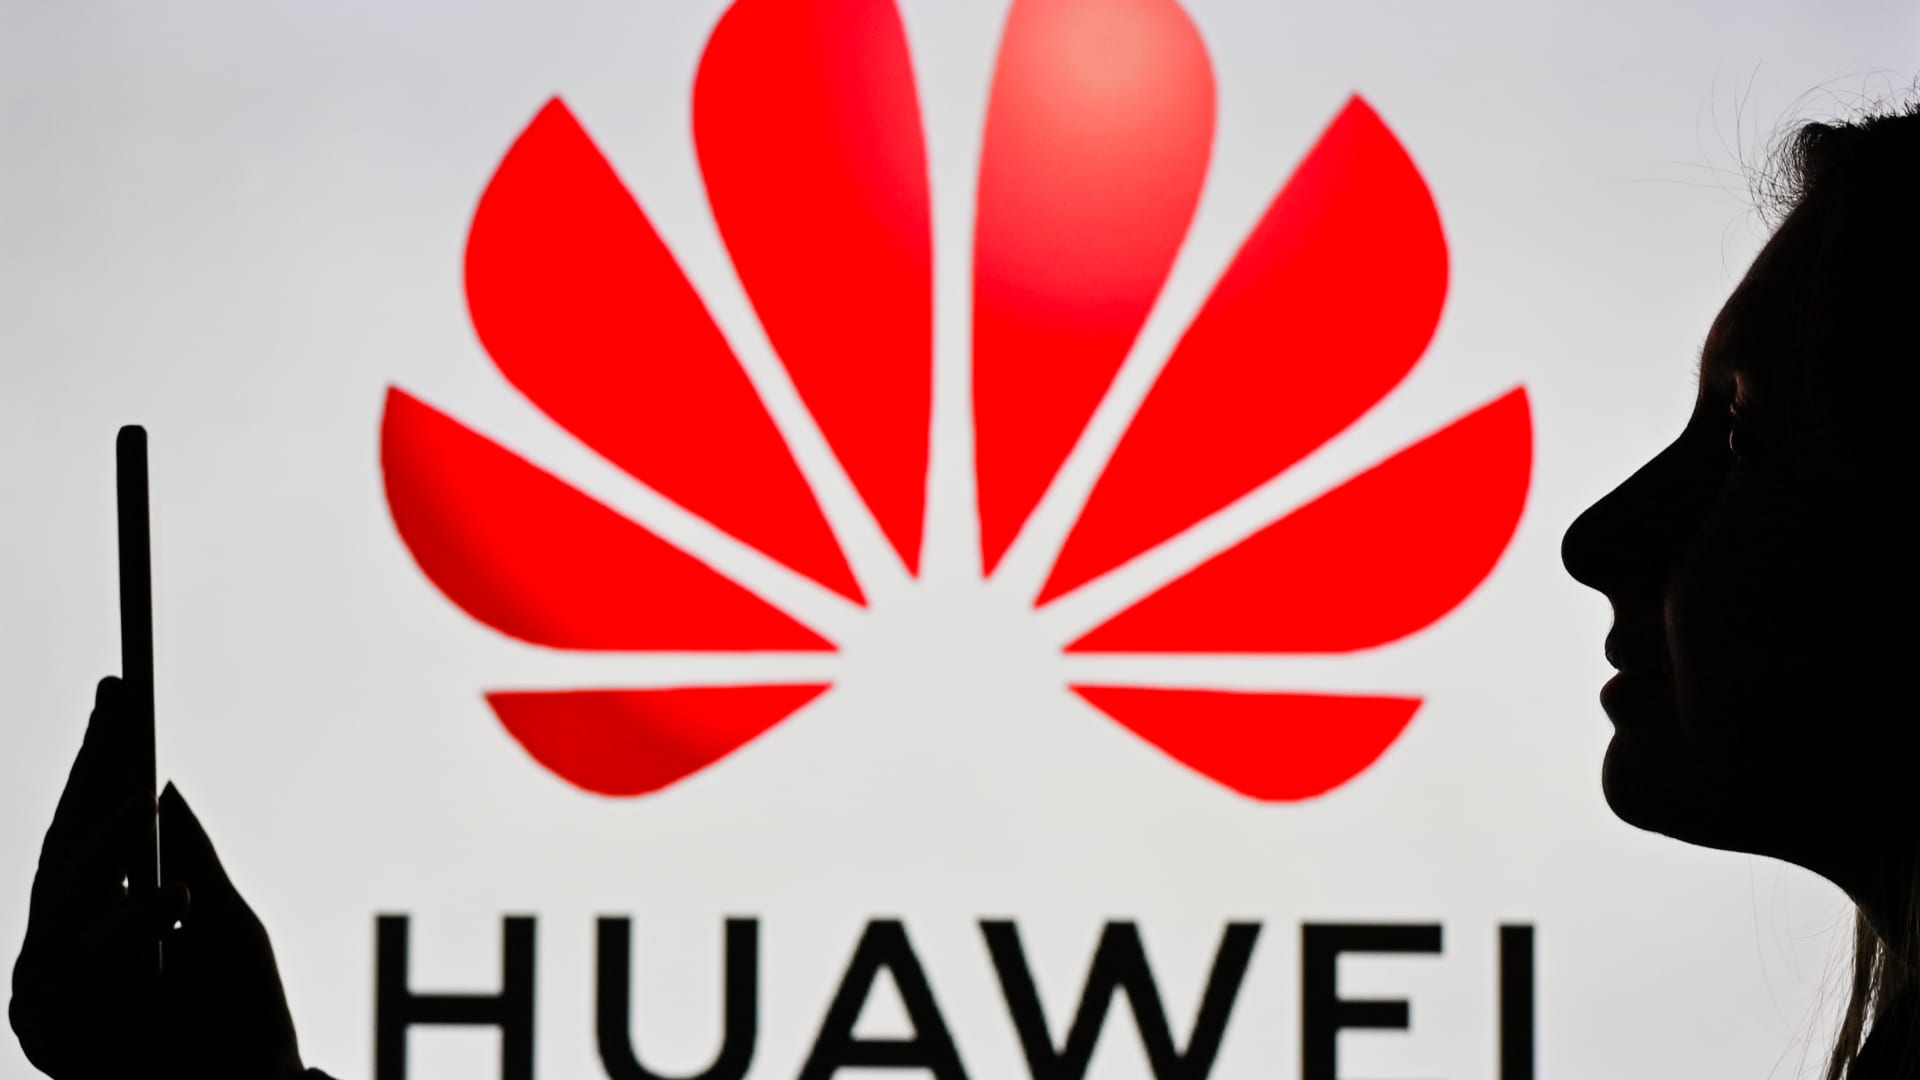 uk-extends-deadline-to-remove-huawei-from-5g-networks-after-one-carrier-warned-of-outages